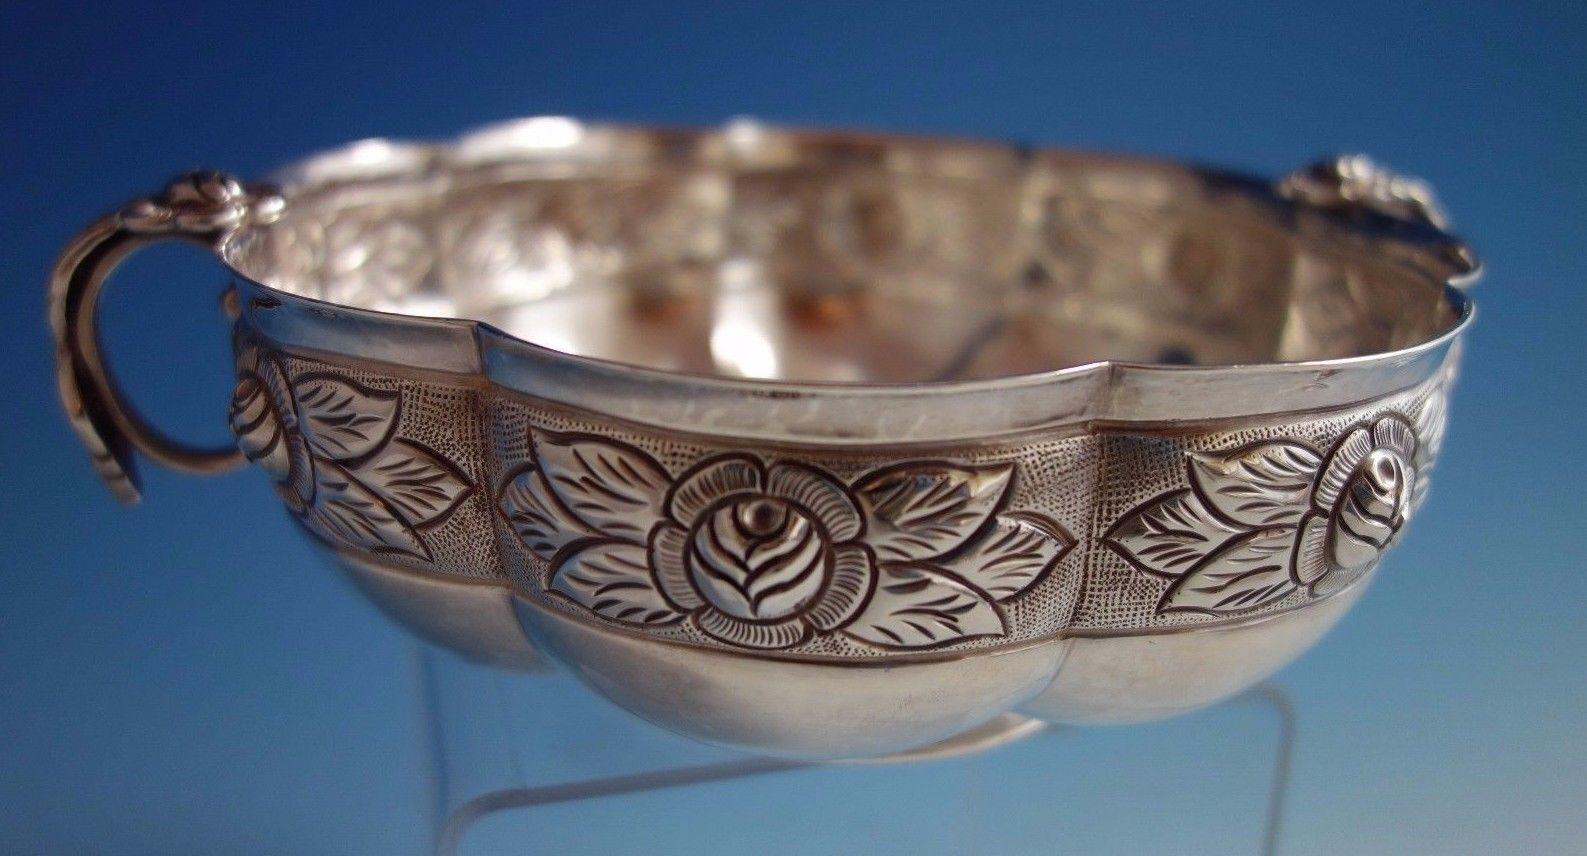 Aztec Rose by Sanborns
Stunning Aztec Rose by Sanborns sterling silver bowl. This dish is inscribed in the bowl and features a beautiful border of flowers with a fluted design. The inscription reads: 